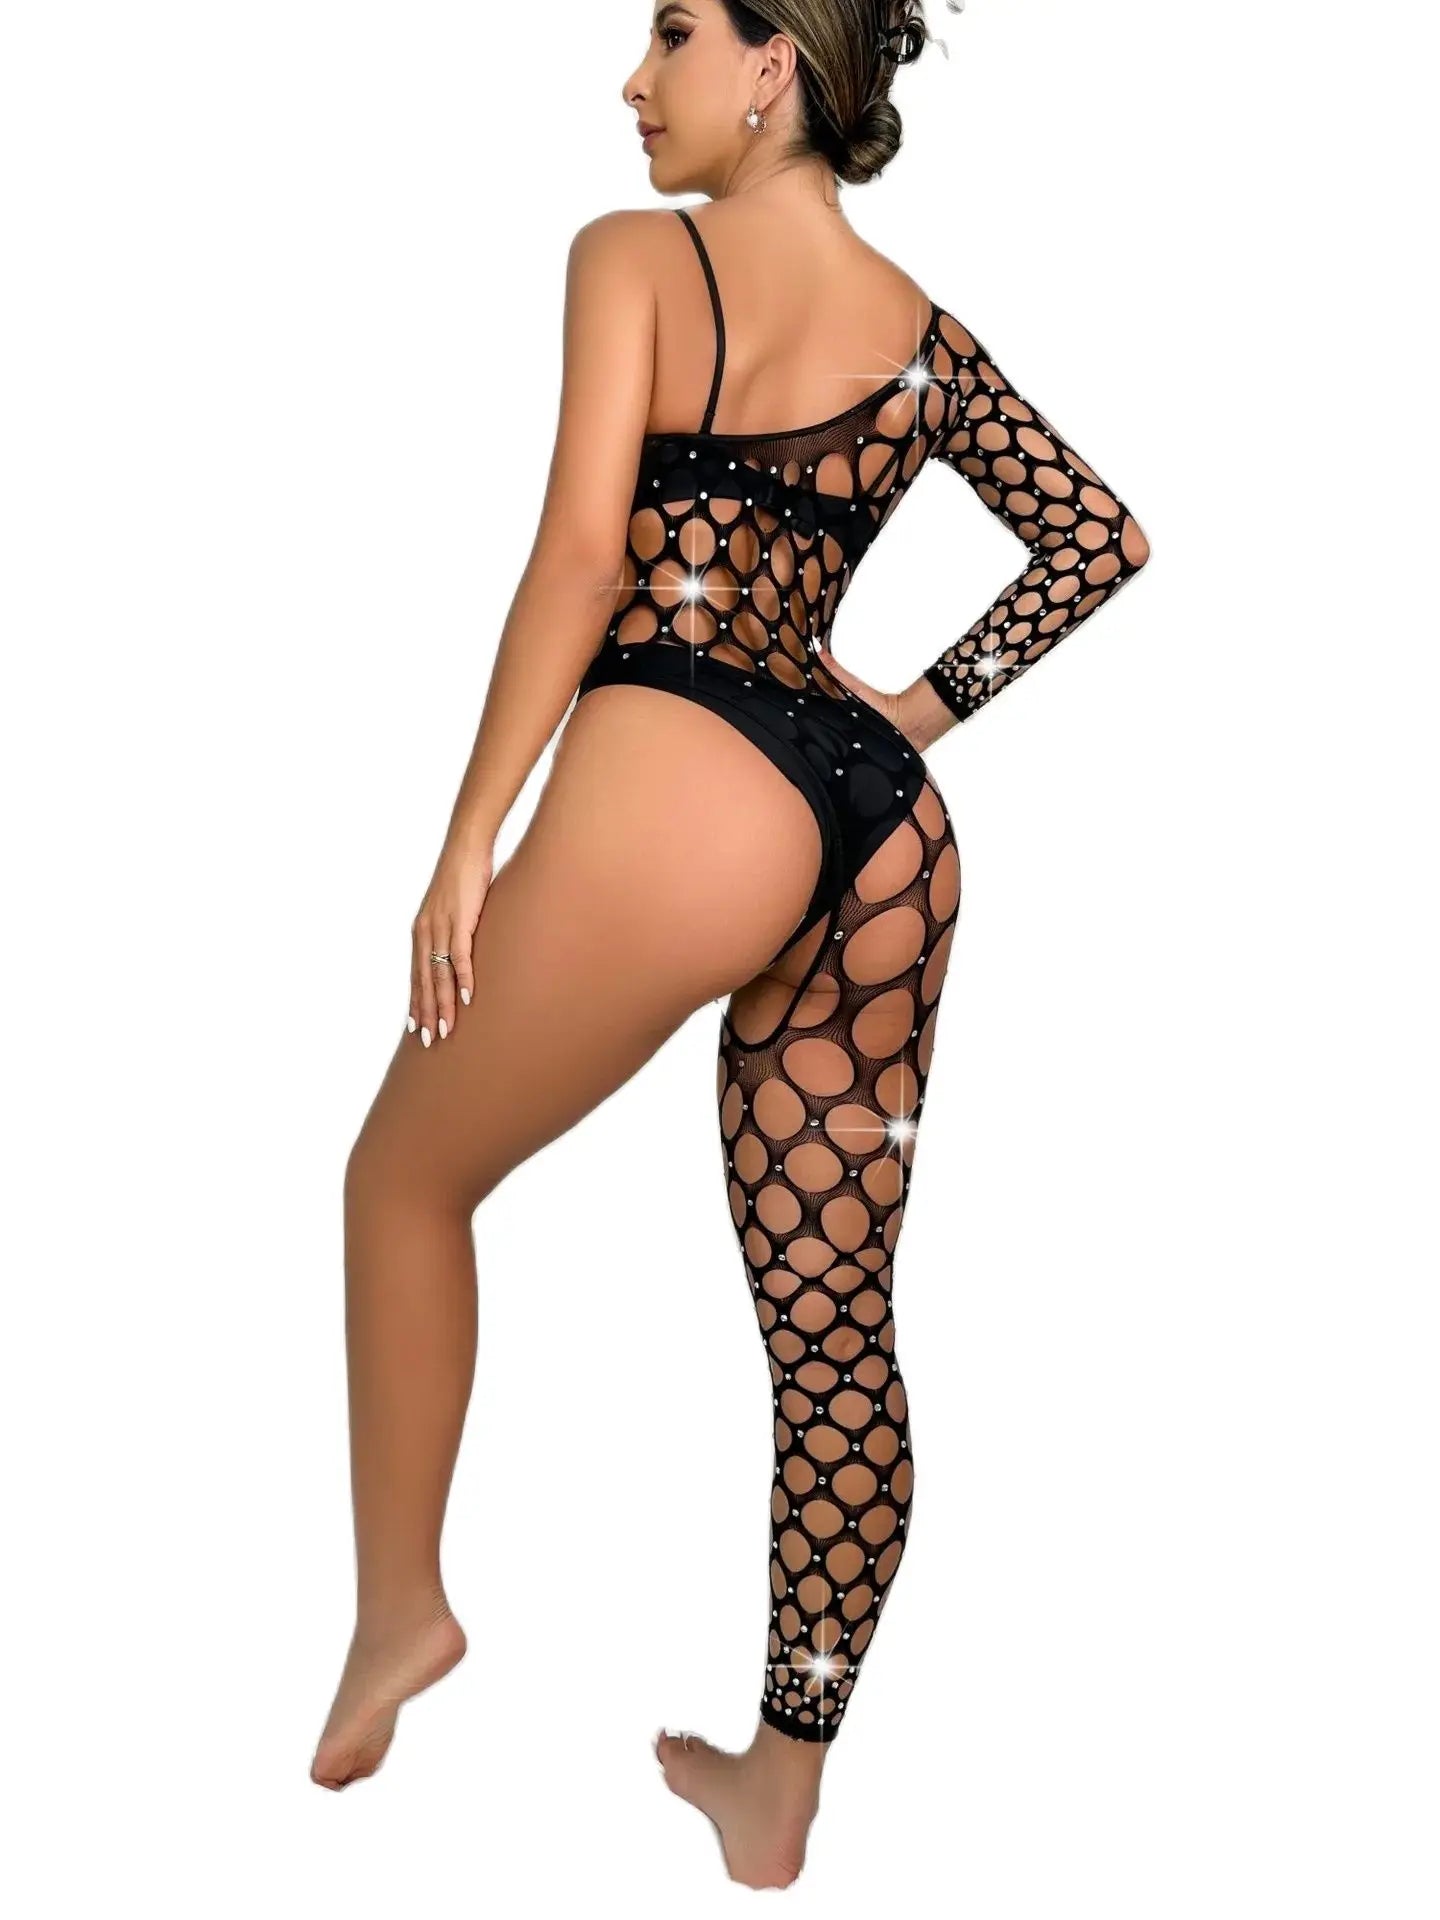 Sexy Rhinestone Fishnet Bodystocking: Perfect for Pole Dancing, Rave, Festival, and Nightlife!